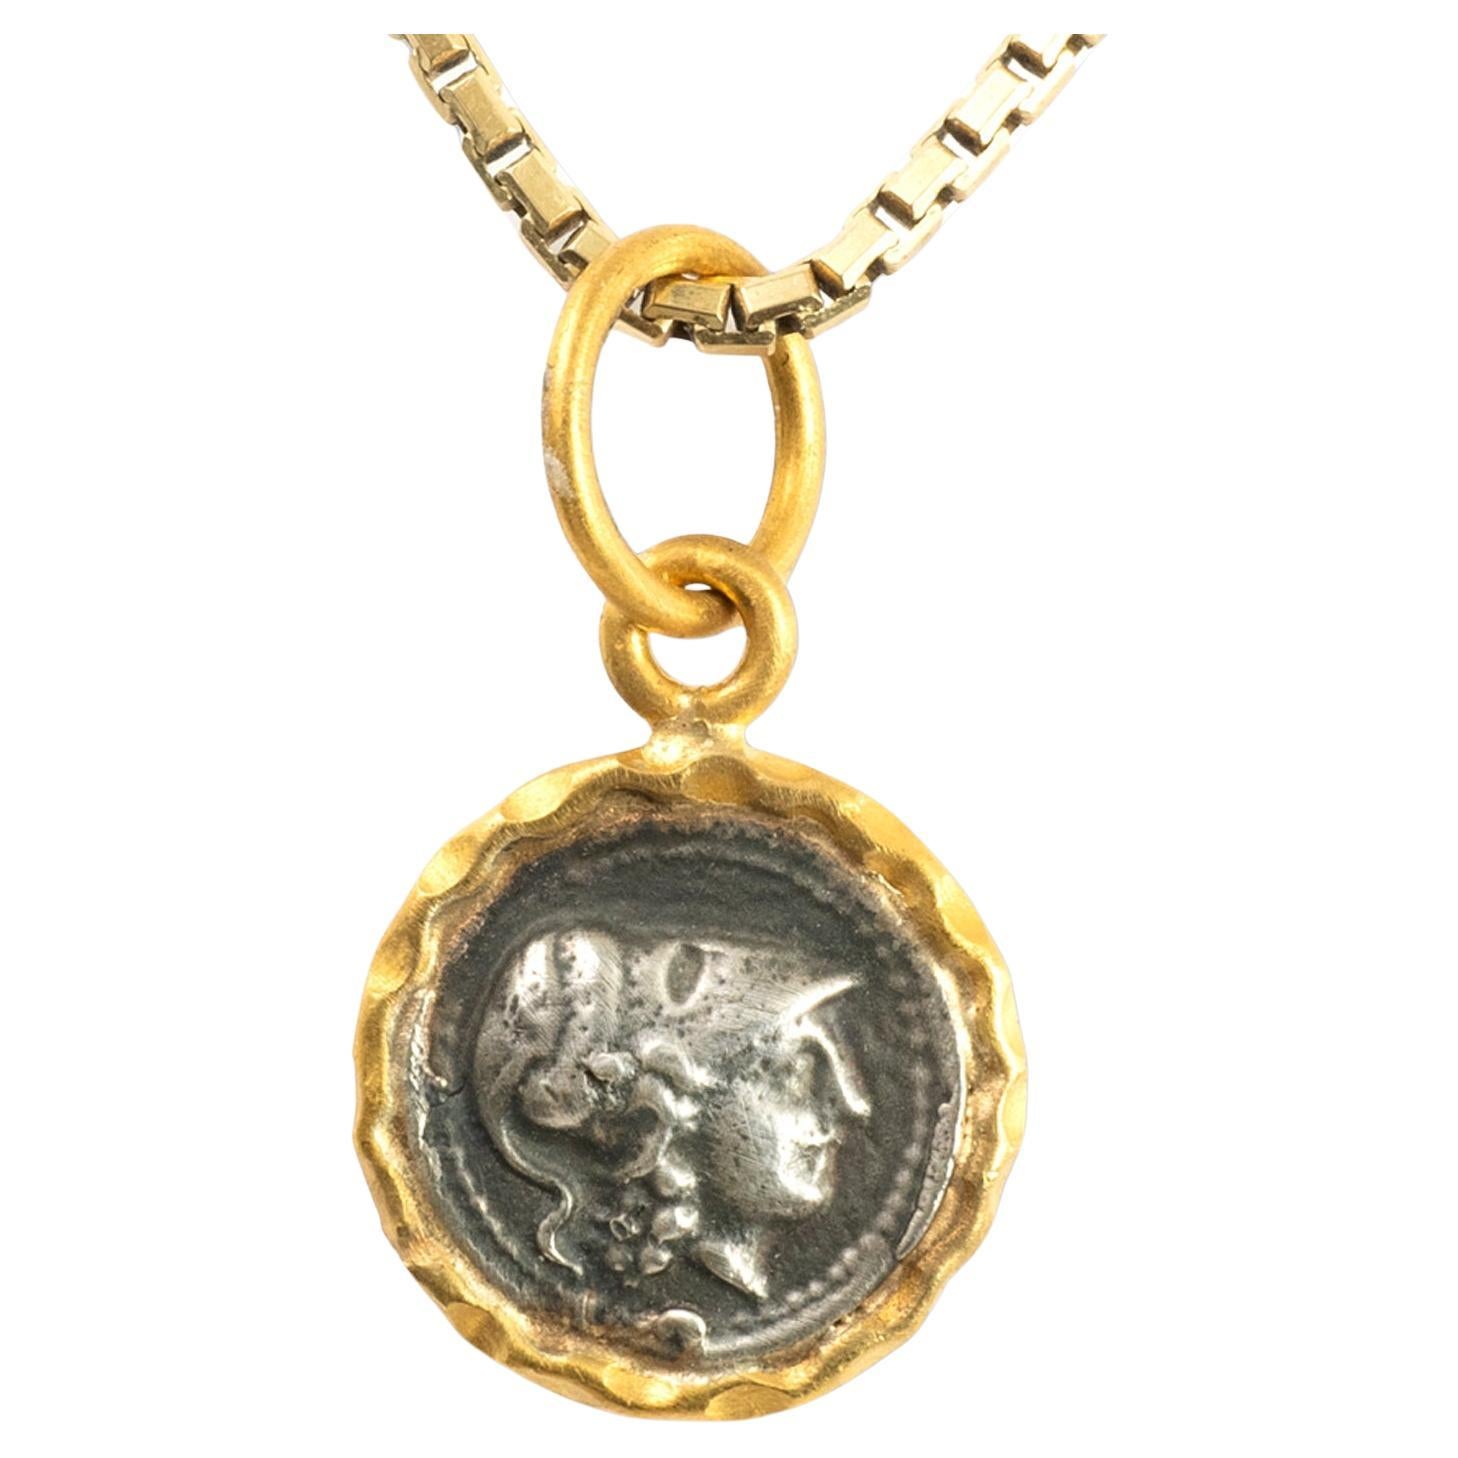 Ancient Athena, Wisdom Goddess, Coin (Replica) Charm Pendant, 24kt Gold & Silver For Sale